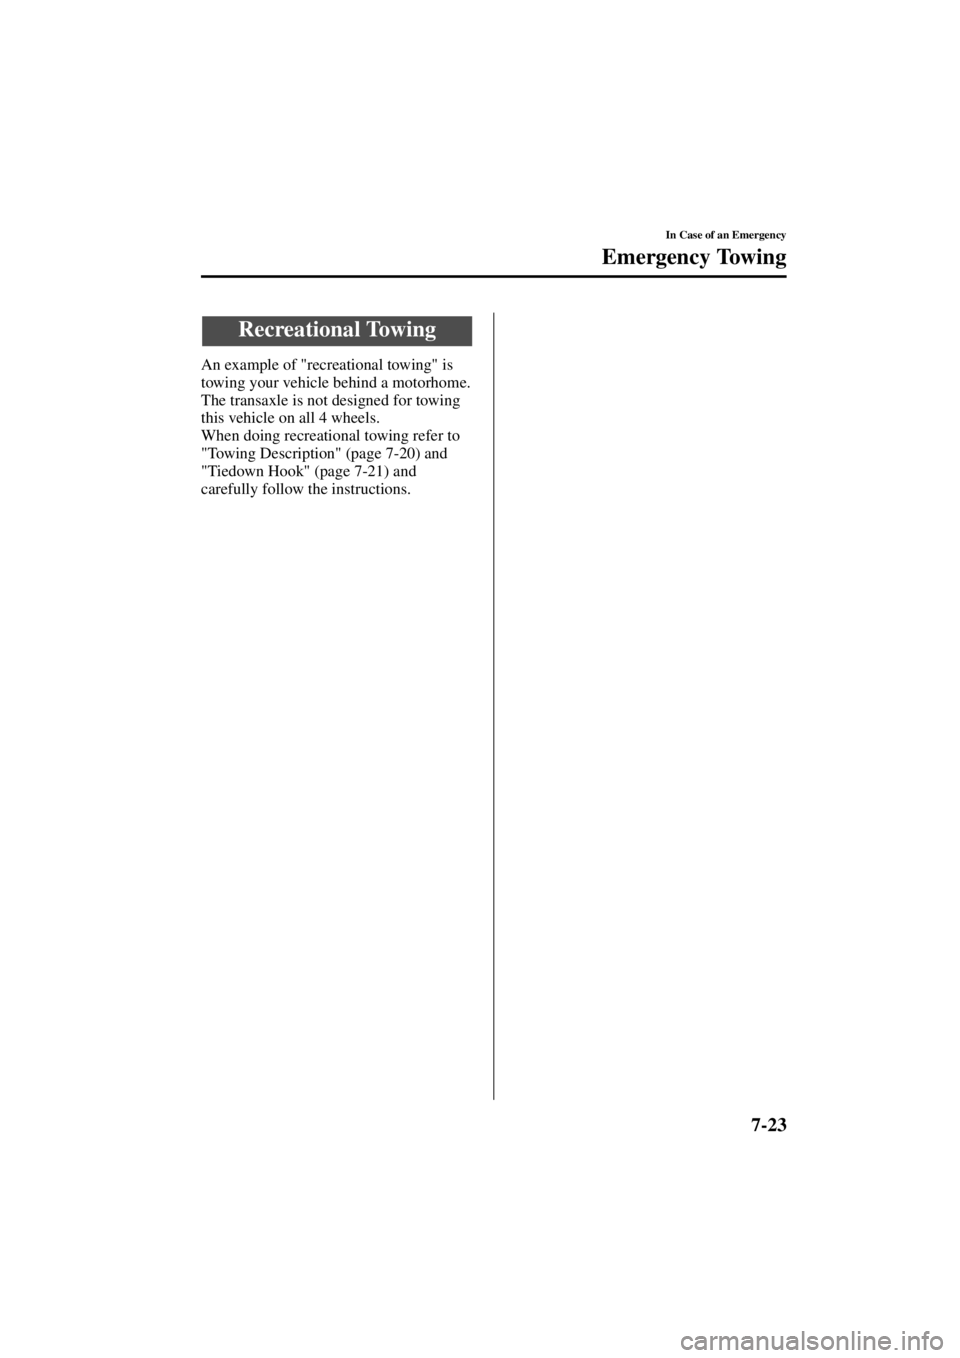 MAZDA MODEL 3 5-DOOR 2004  Owners Manual 7-23
In Case of an Emergency
Emergency Towing
Form No. 8S18-EA-03I
An example of "recreational towing" is 
towing your vehicle behind a motorhome.
The transaxle is not designed for towing 
this vehicl